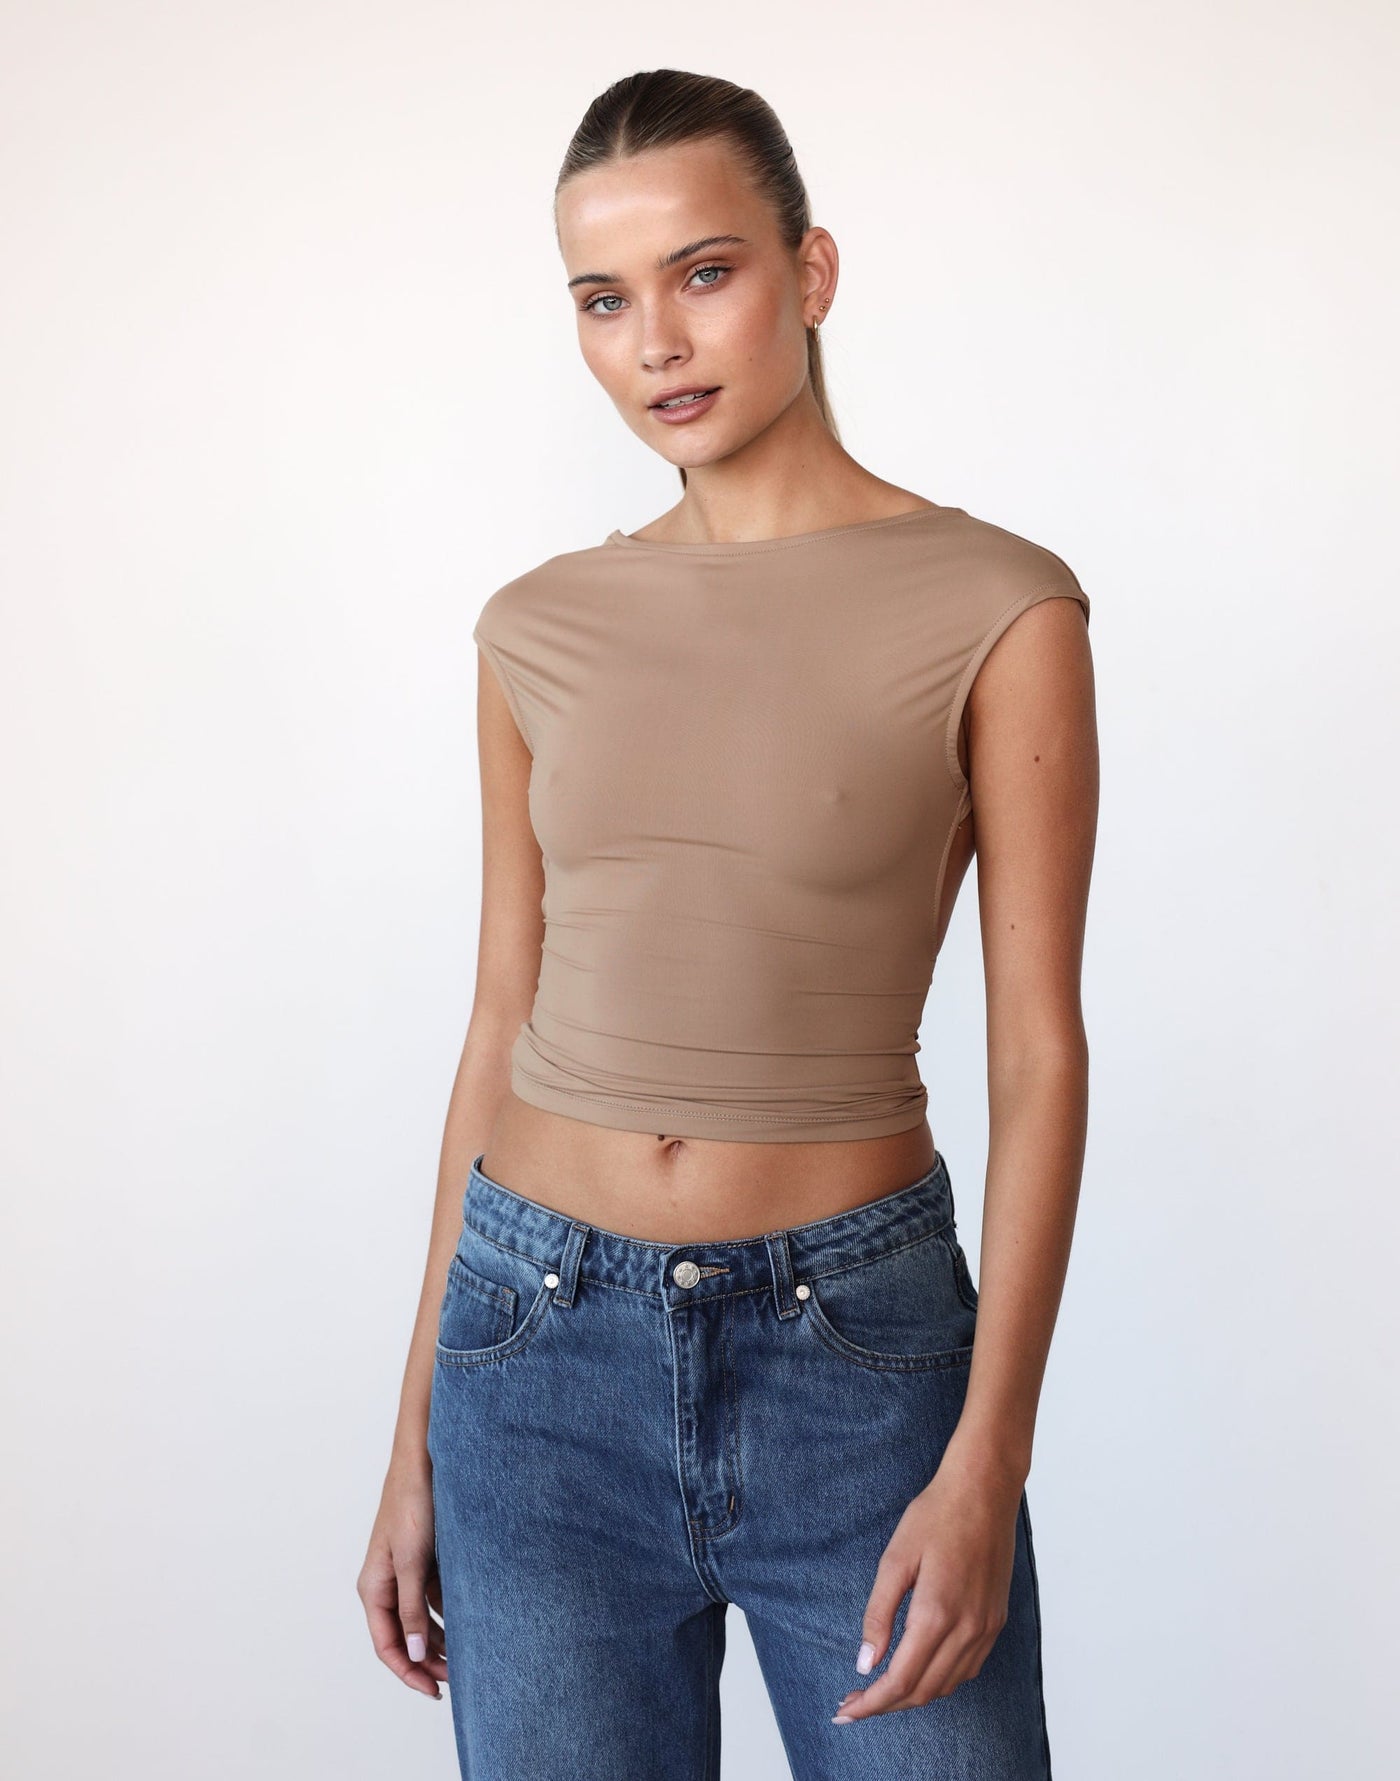 Uno Tie Top (Taupe) - Backless Tie Up Back Top - Women's Top - Charcoal Clothing